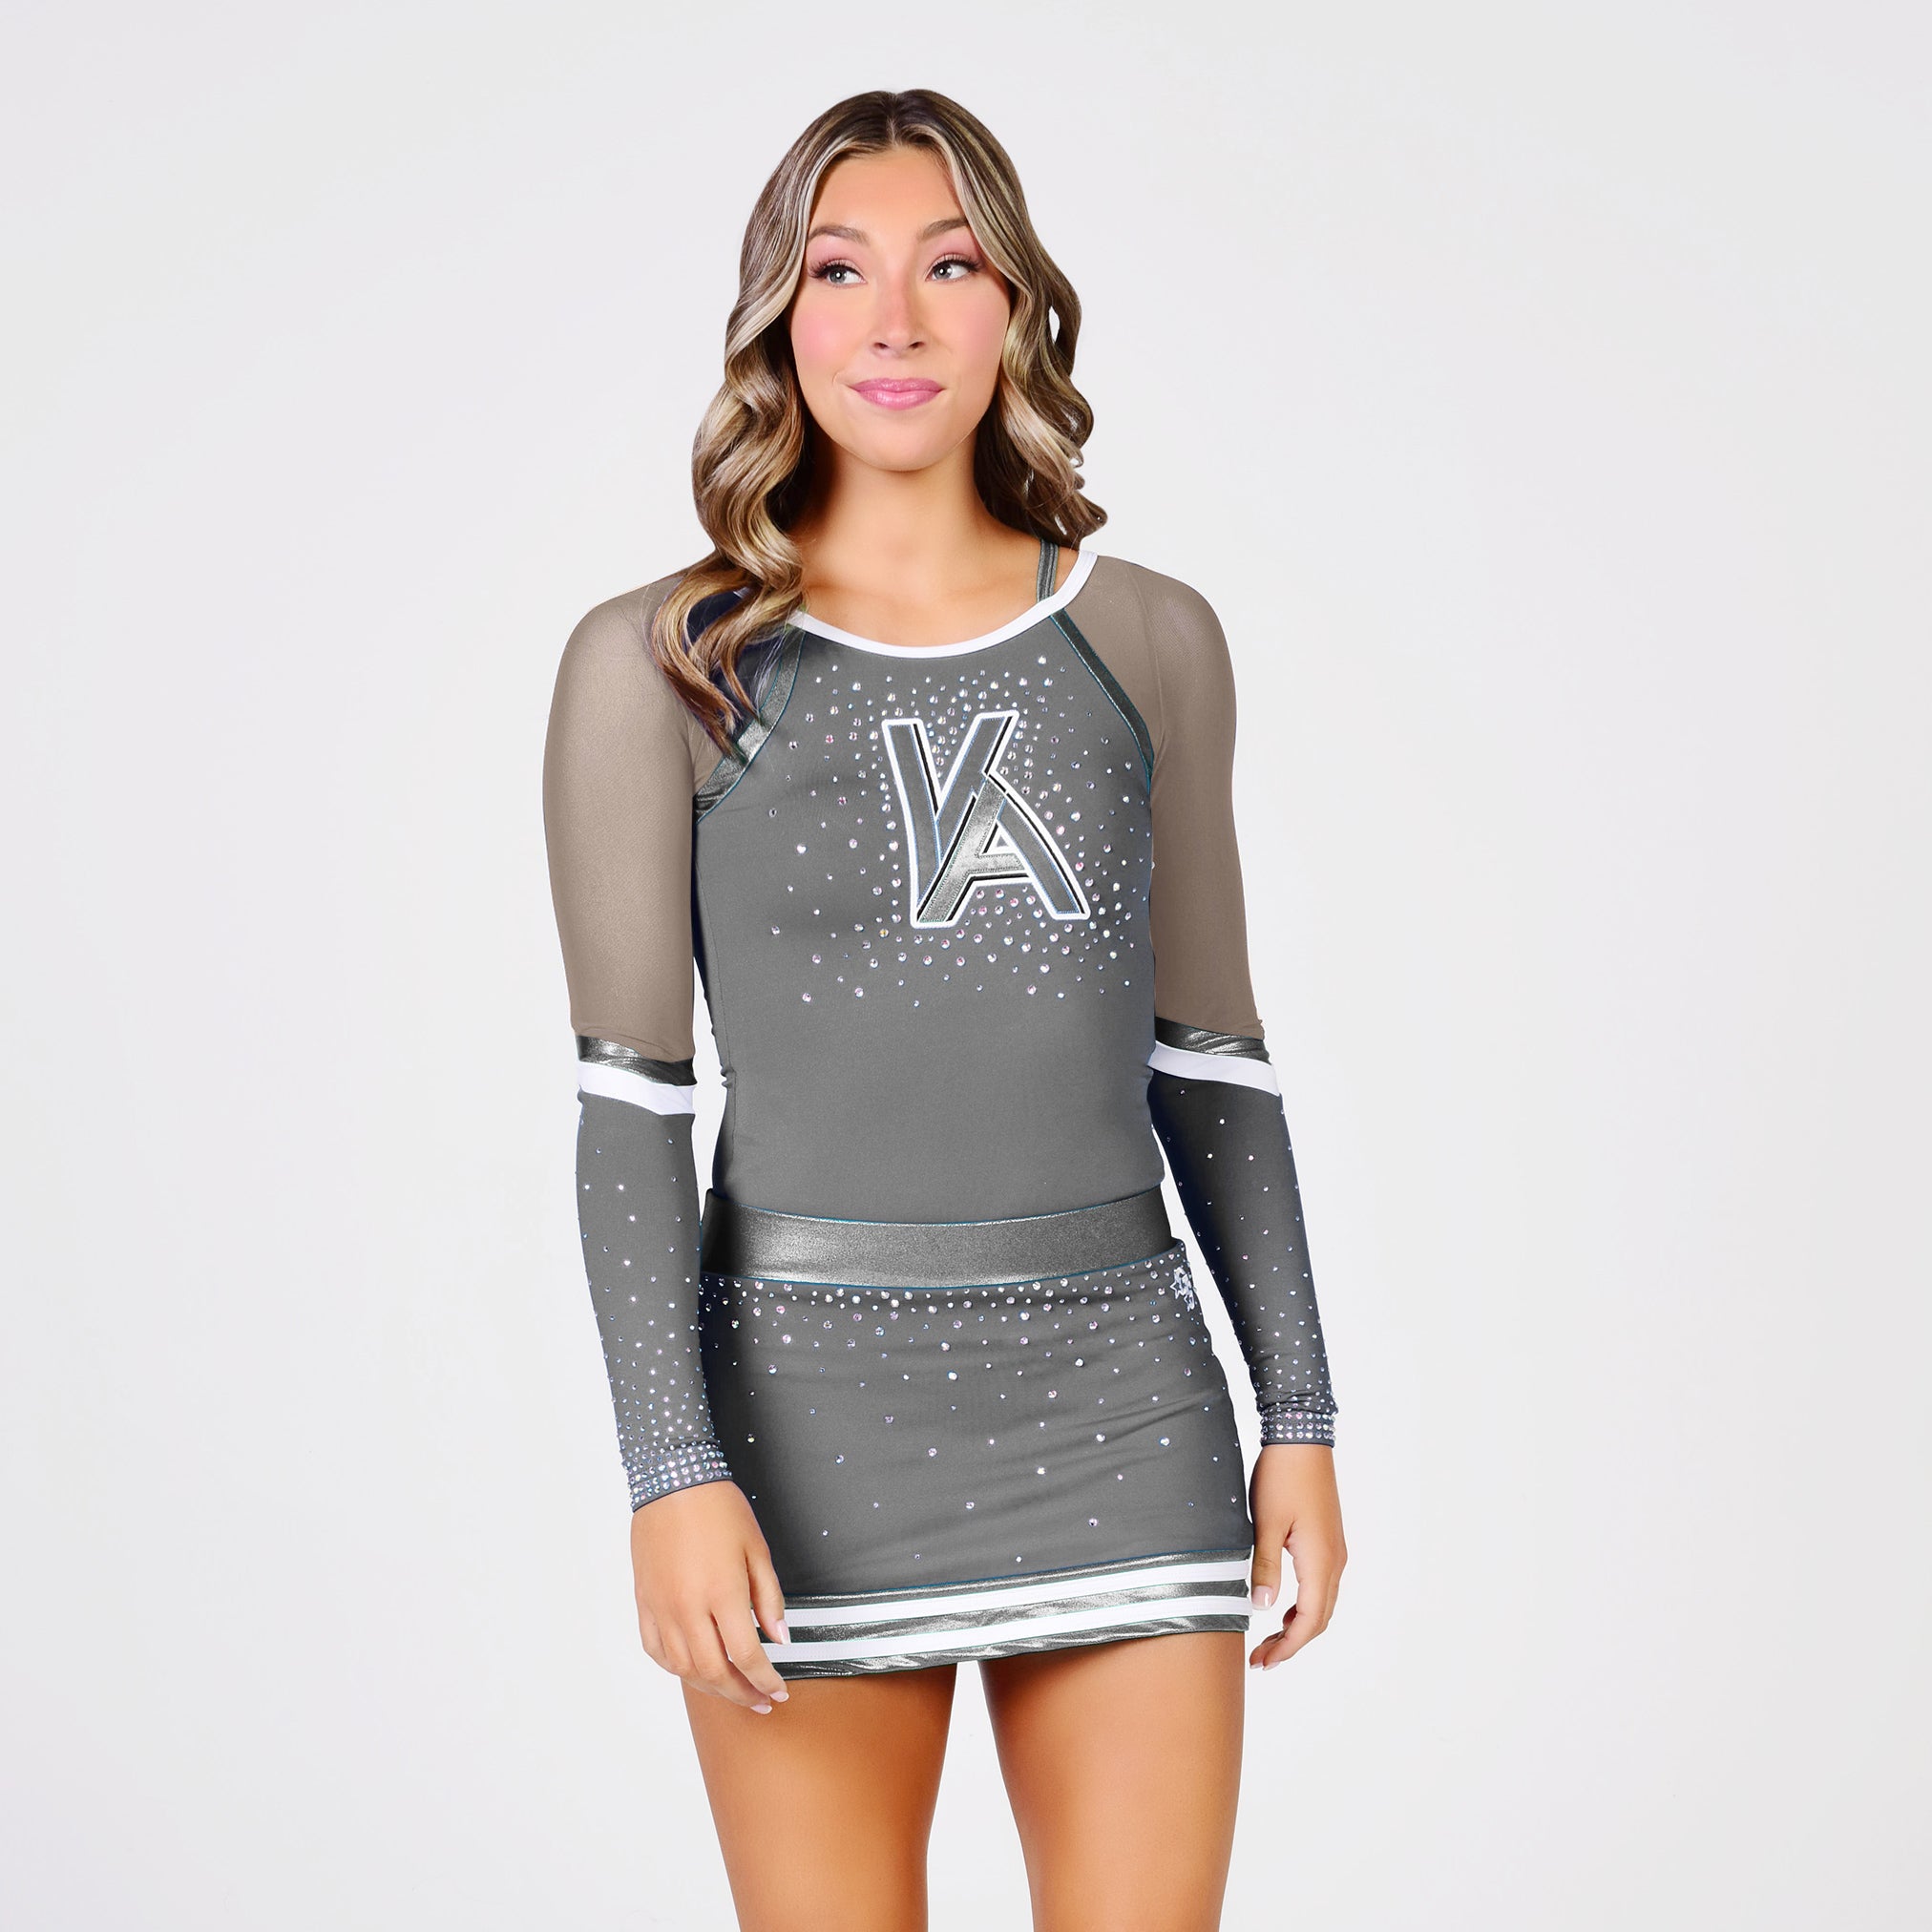 Journey Uniform with Mesh Sleeves - Grey